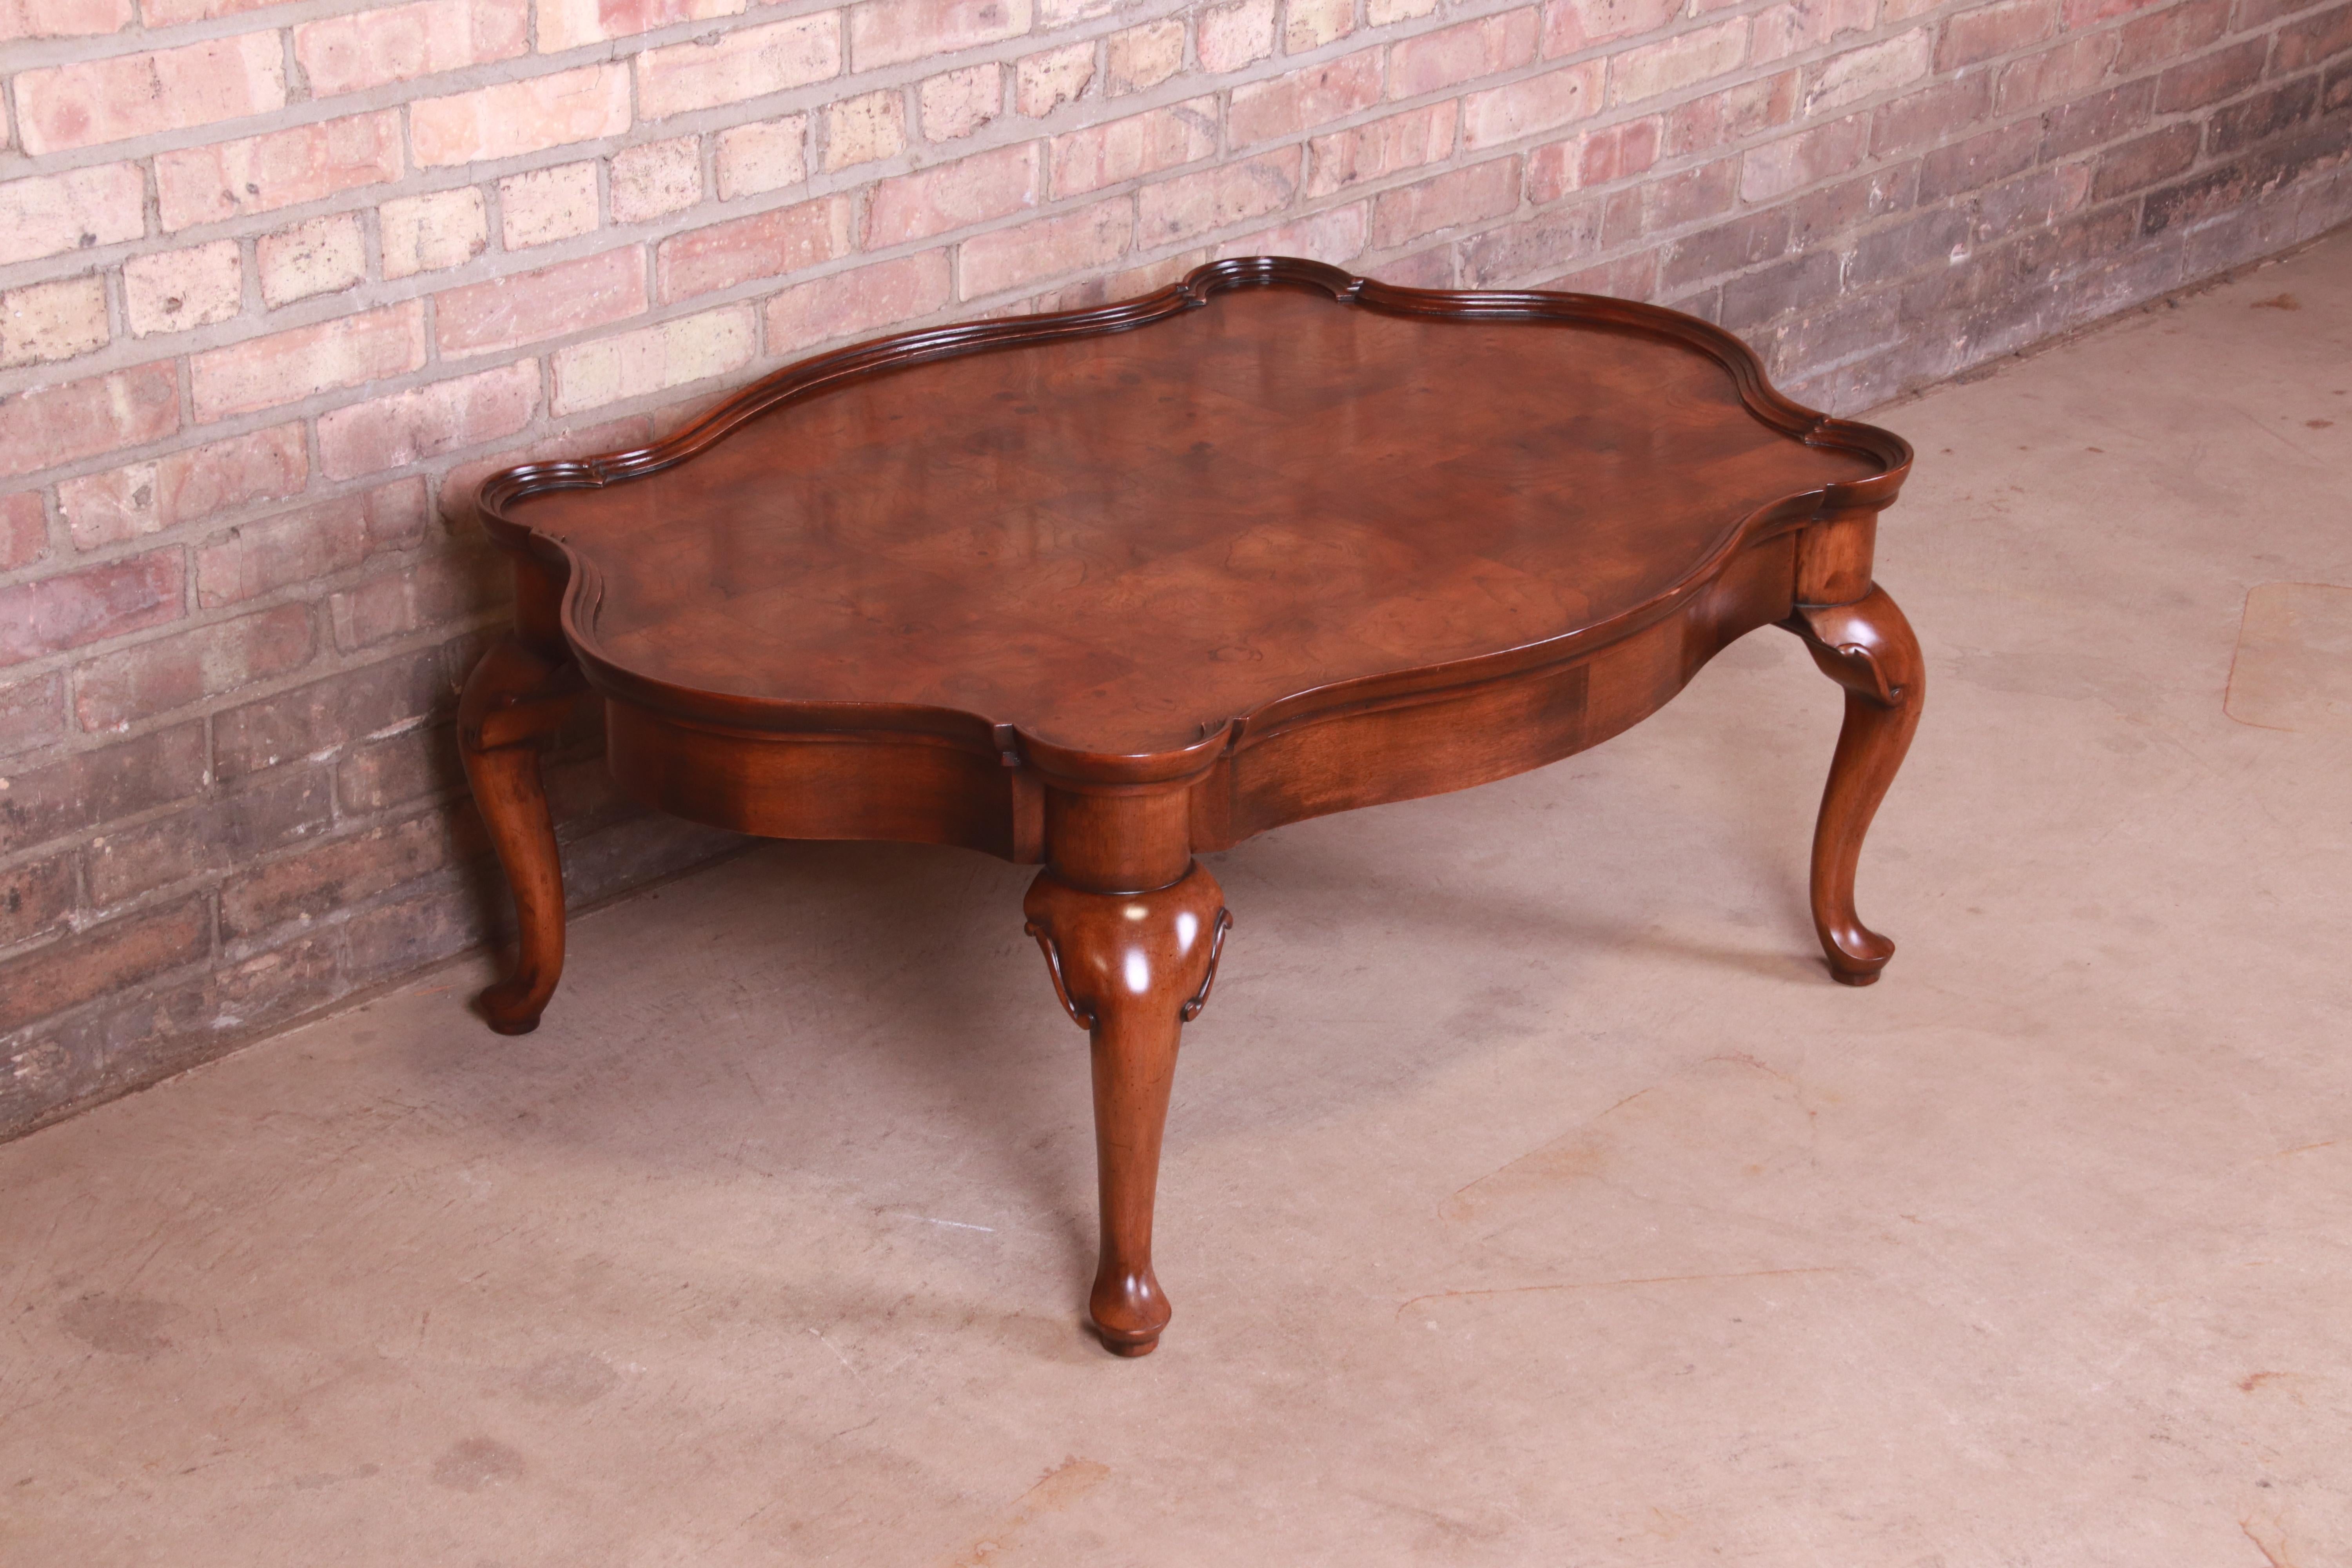 French Provincial Mahogany and Burl Coffee Table Attributed to Baker Furniture 1